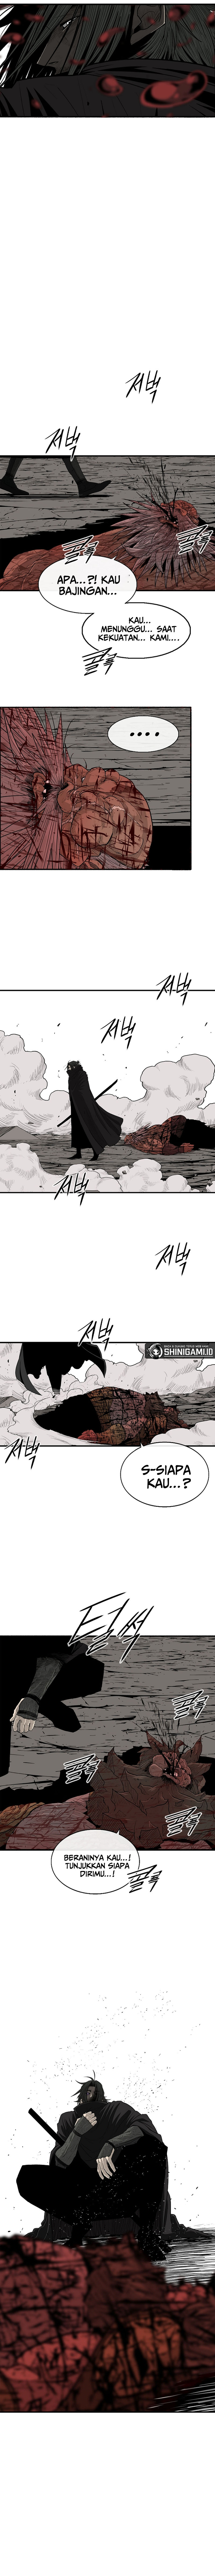 legend-of-the-northern-blade Chapter 157